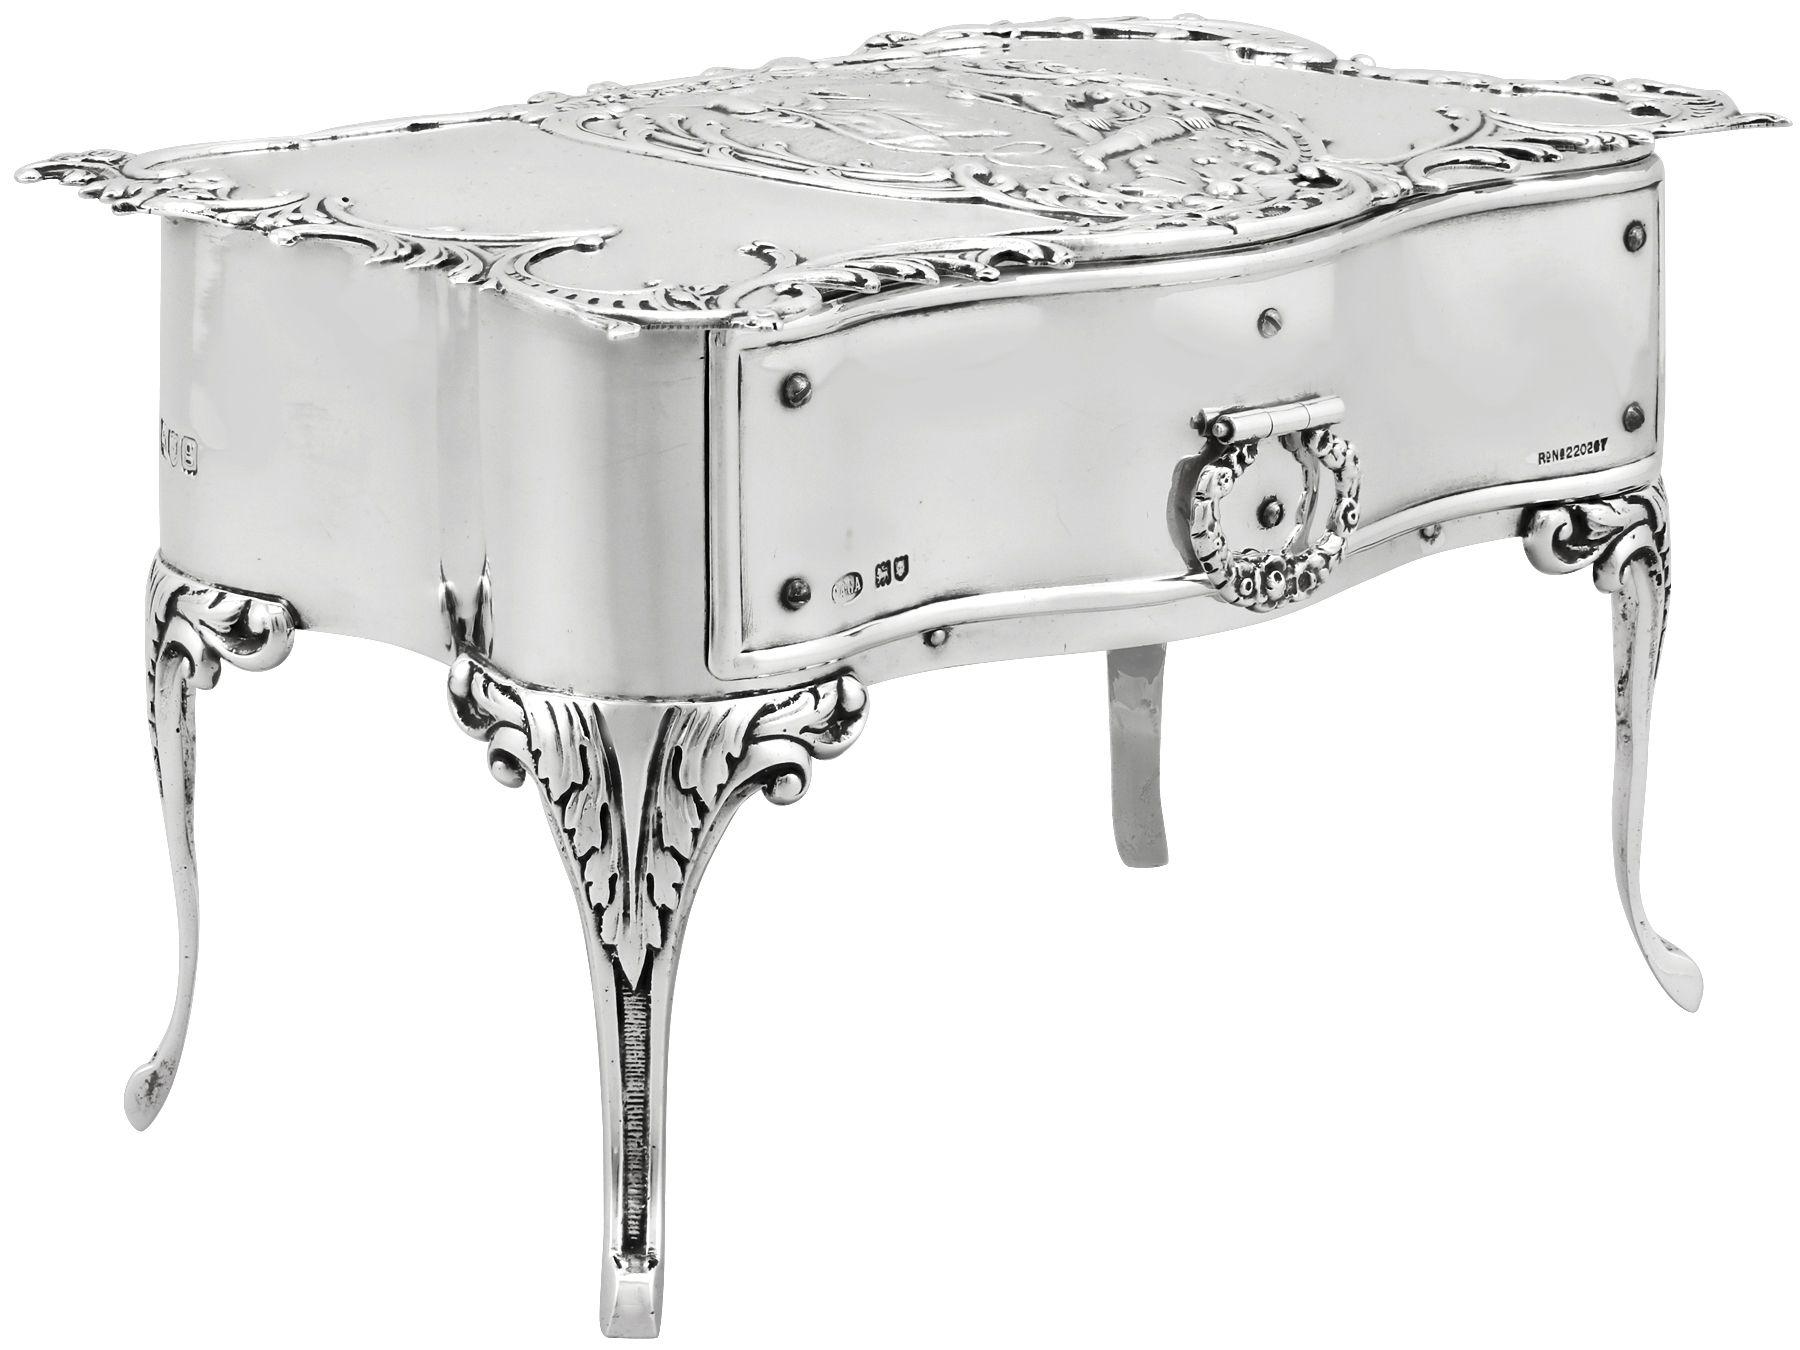 An exceptional, fine and impressive antique Edwardian English sterling silver jewelry box; an addition to the ornamental silverware collection

This exceptional antique Edwardian sterling silver jewelry box has been realistically modelled in the